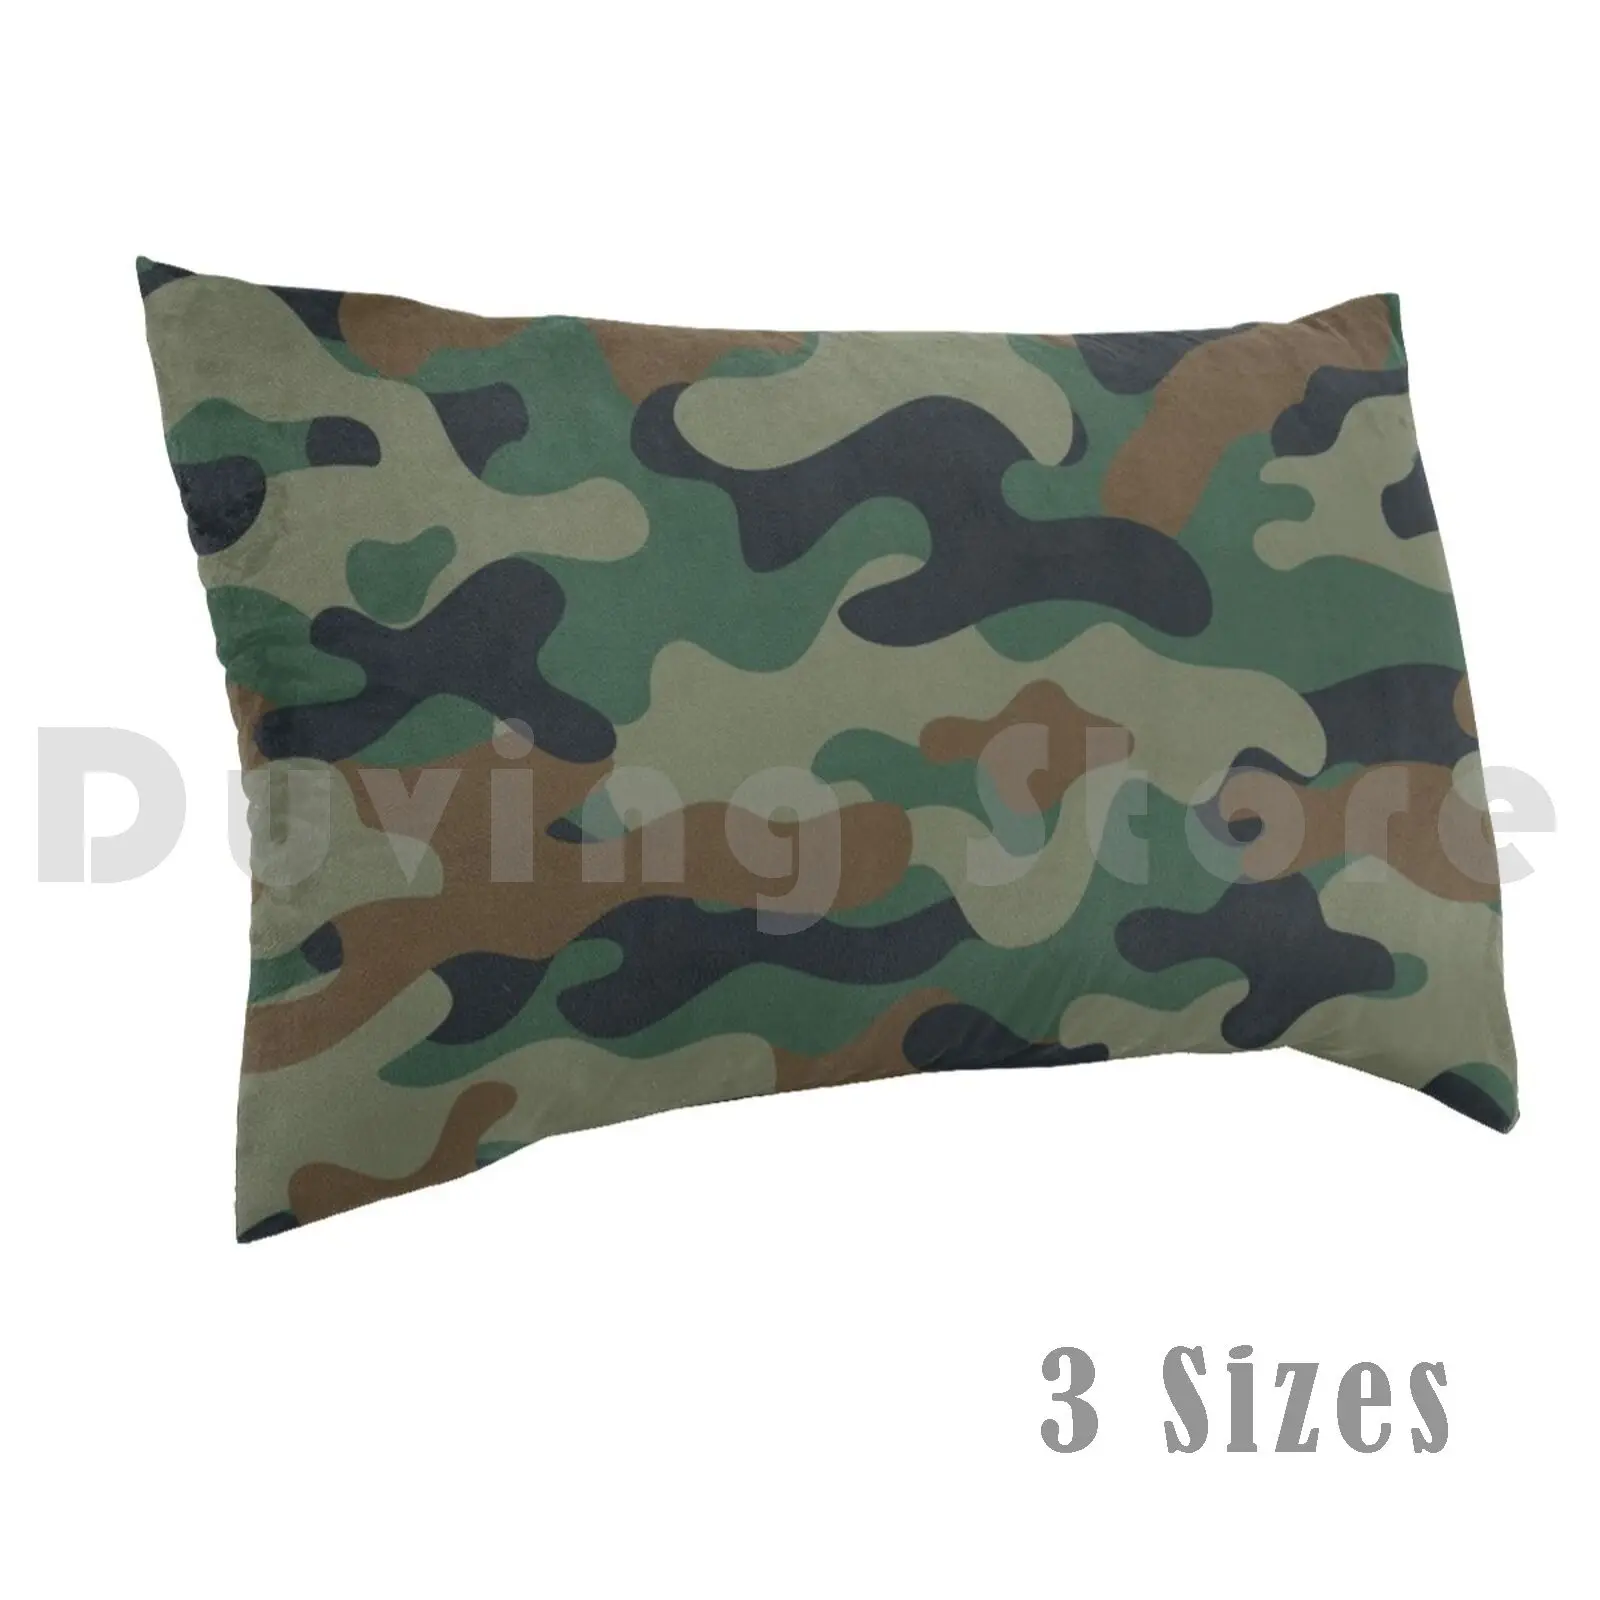 

Pillow Case Camo Pattern-Green / Brown 1616 Military Army Armed Forces Camouflage Cammo